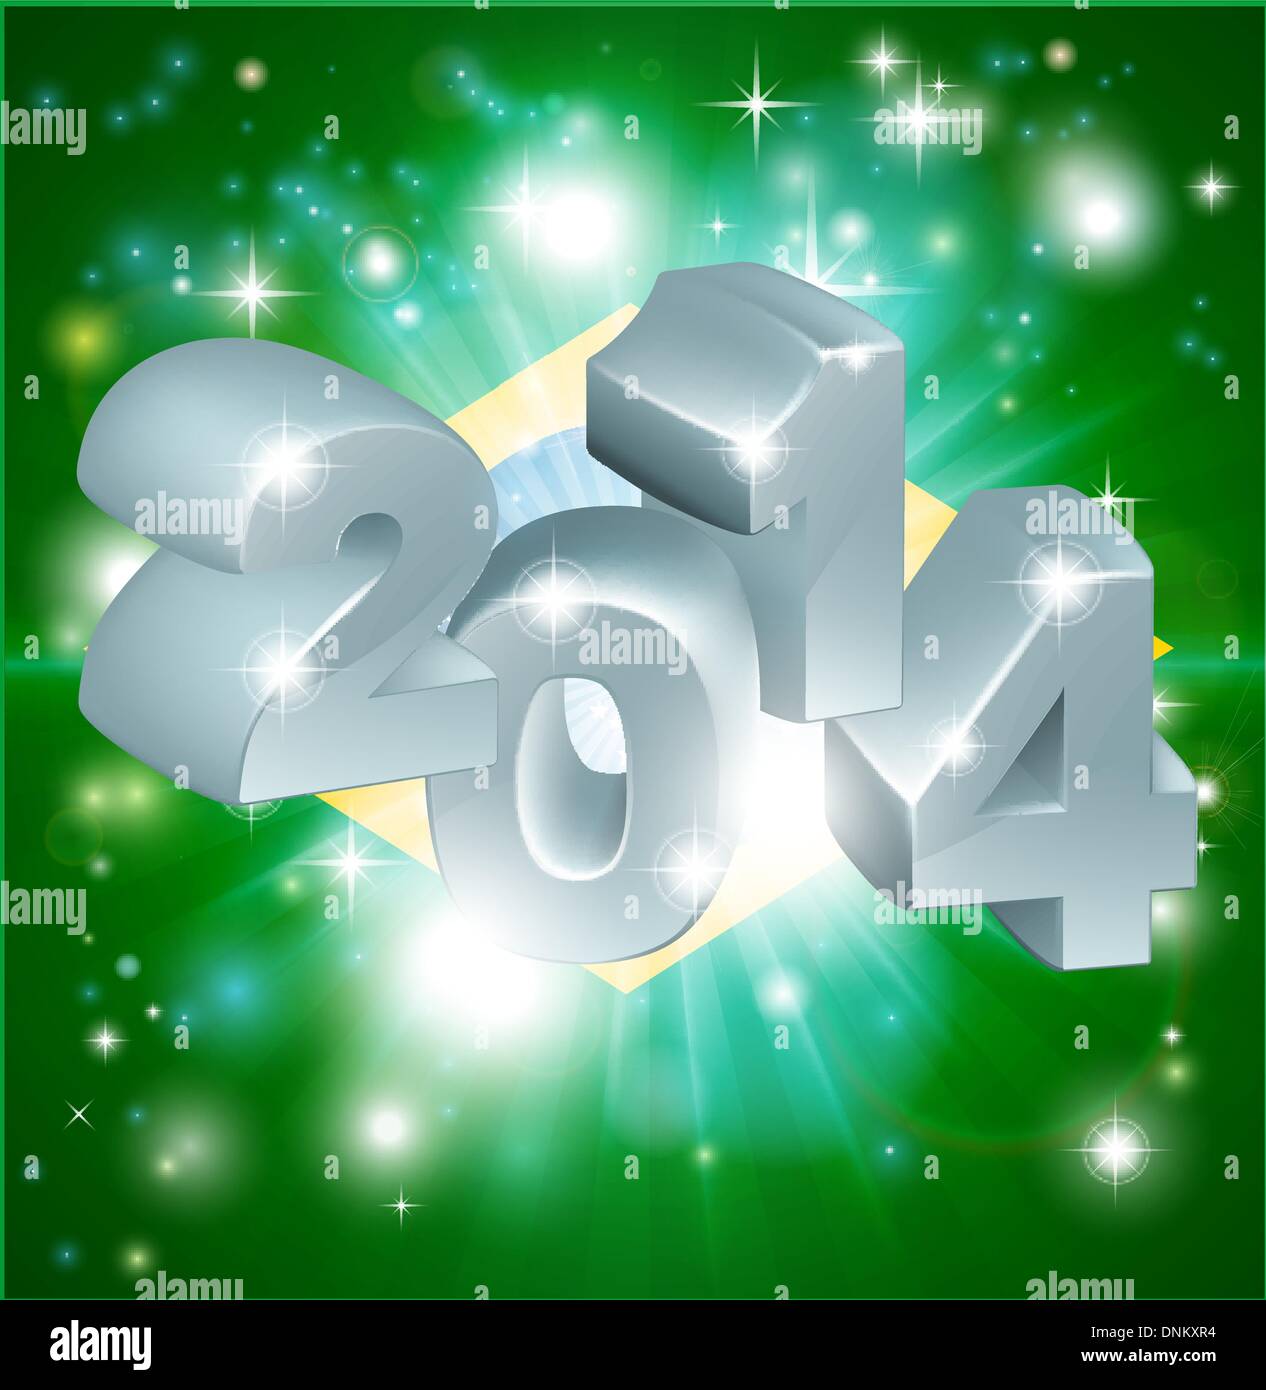 Flag of Brazil 2014 background. New Year or similar concept Stock Vector